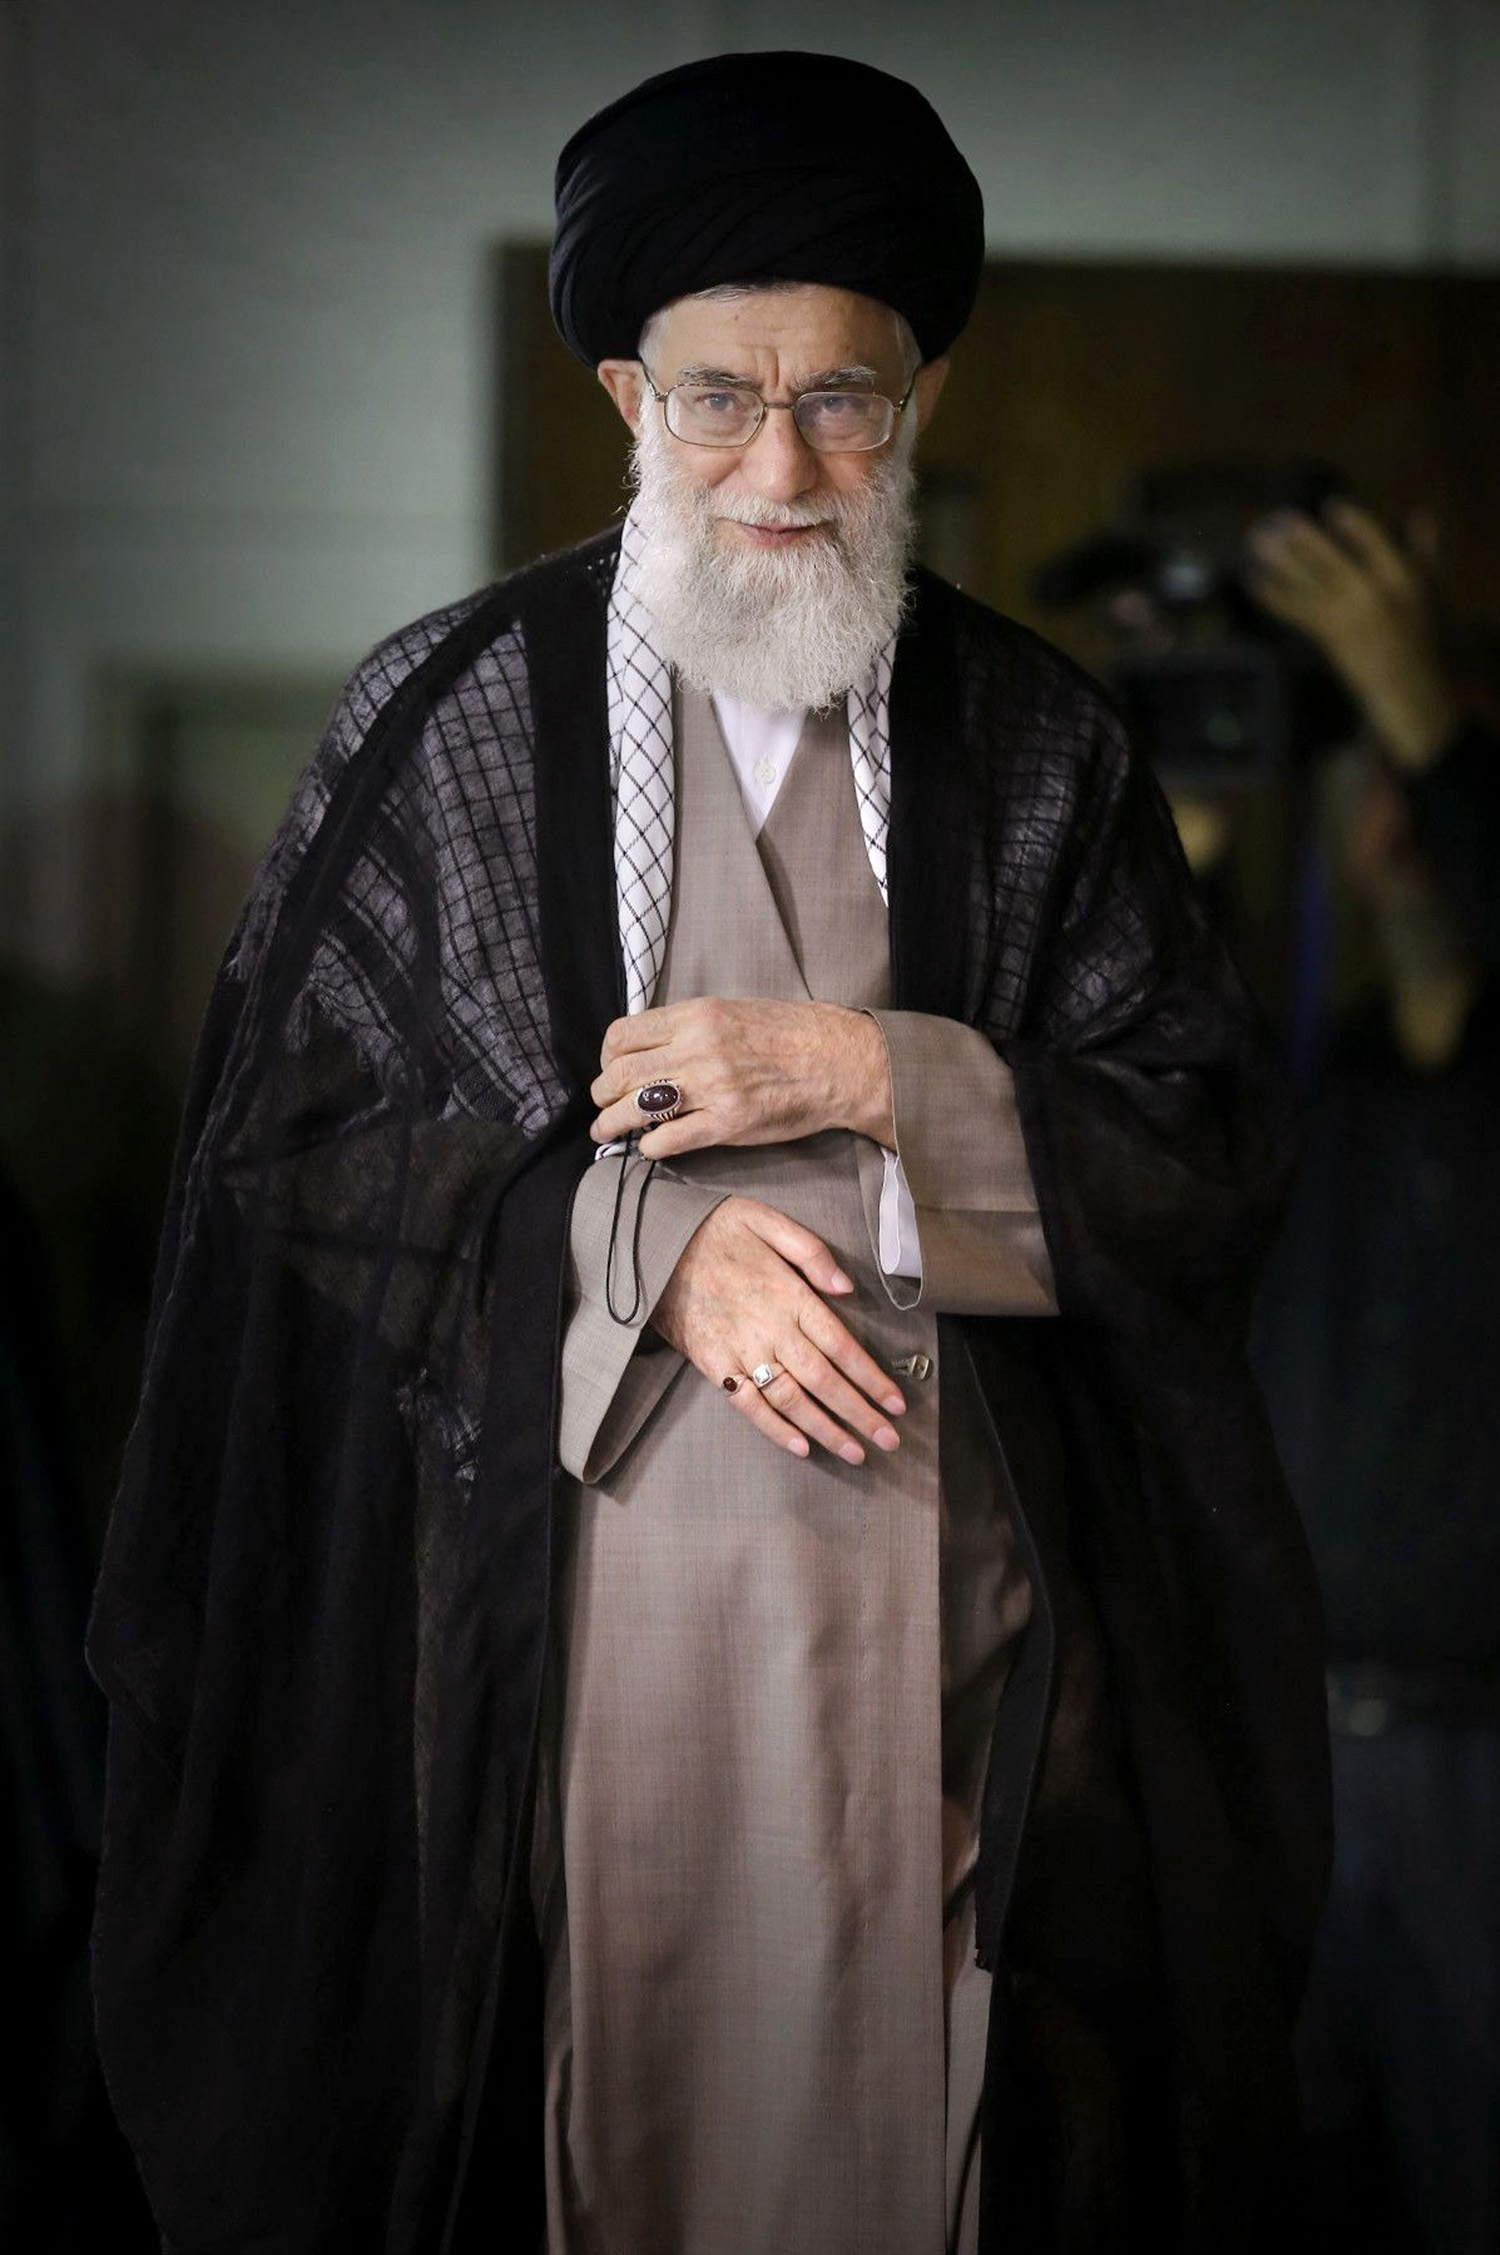 Ultimate authority Khamenei, in Tehran, remains staunchly anti-American (ay-collection/sipa)